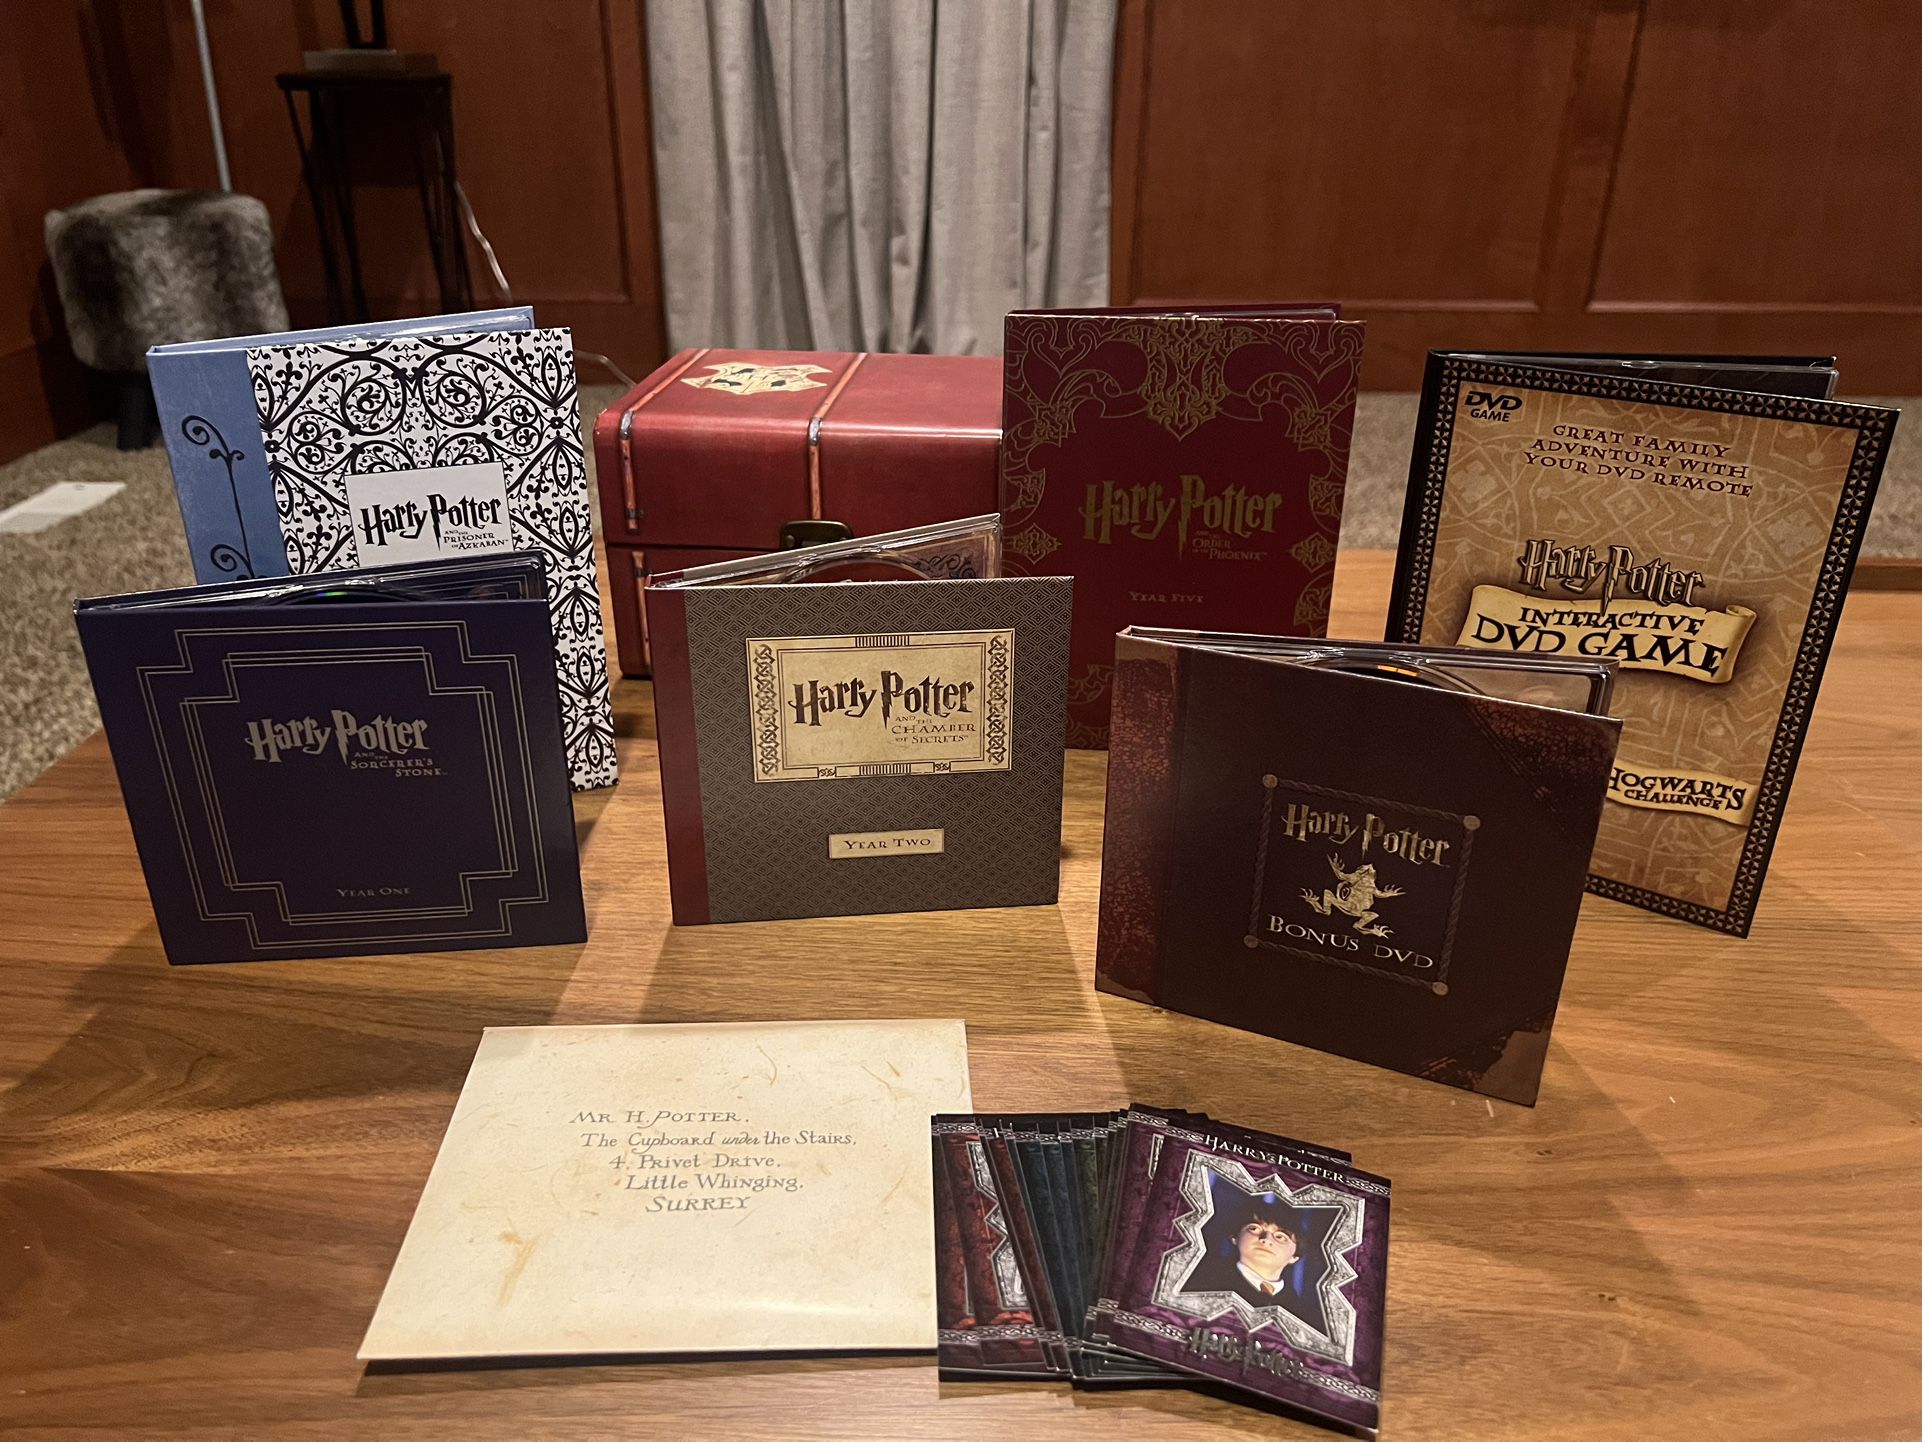 Harry Potter Years 1-5 Limited Edition Gift Set (missing Year 4 & Metal Trinkets)